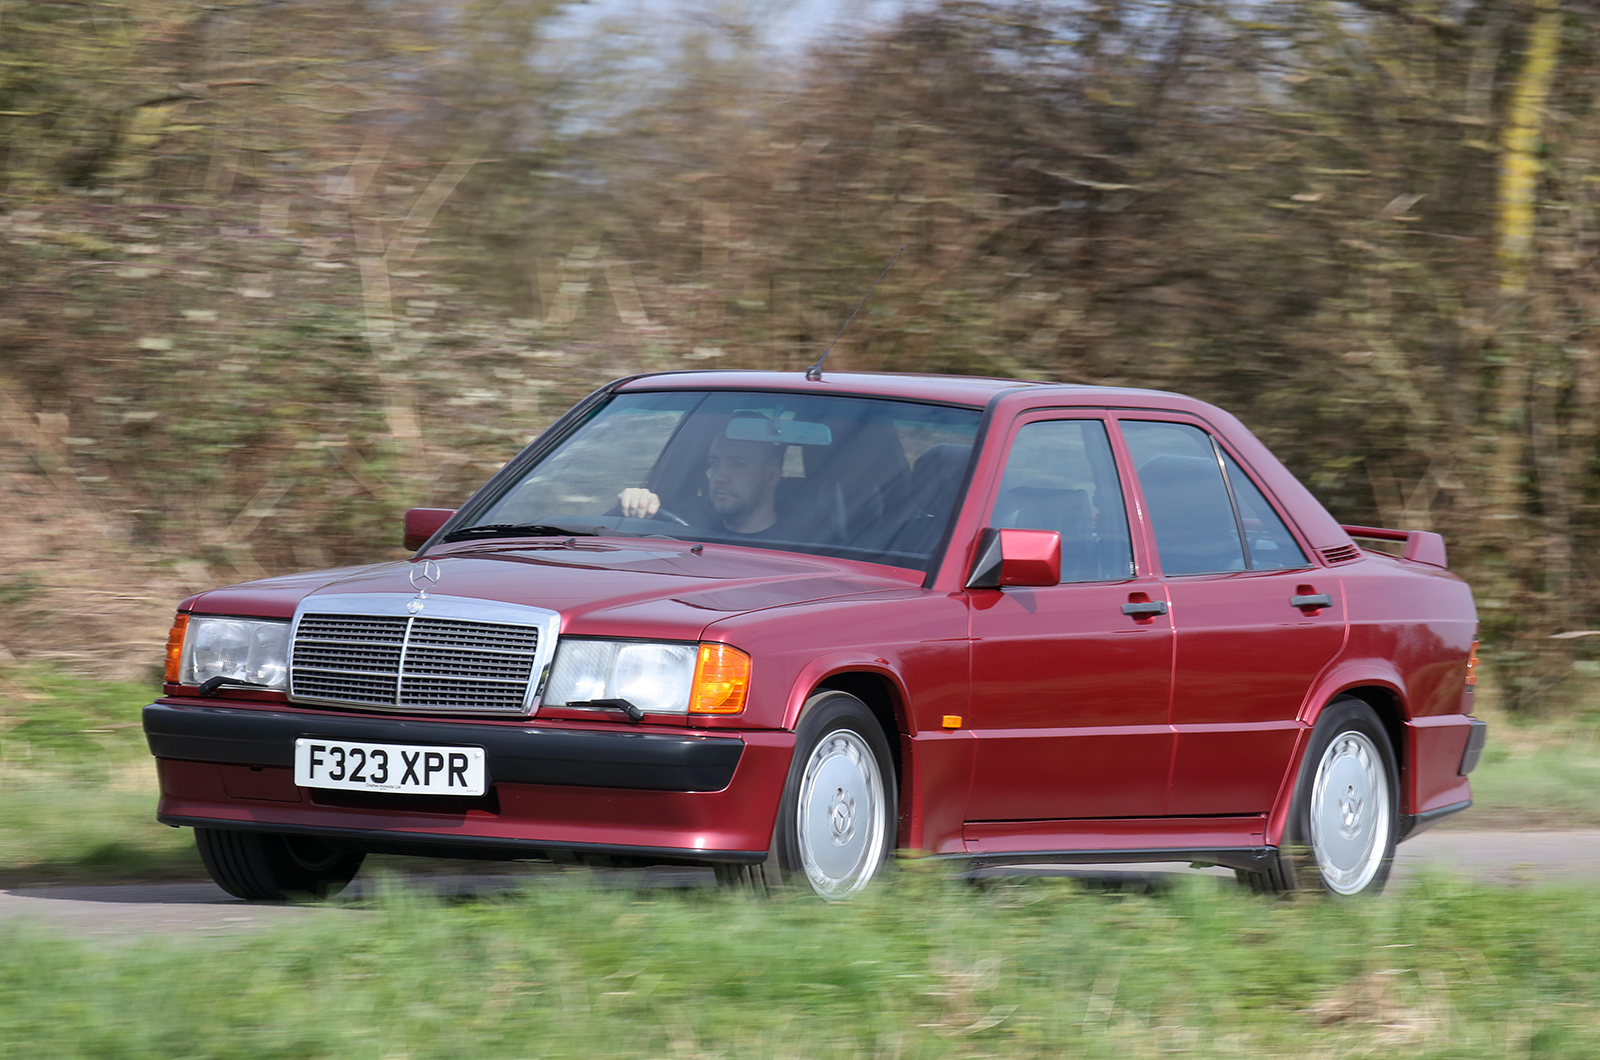 Mercedes-Benz W201 buyer's guide: what to pay and what to look for